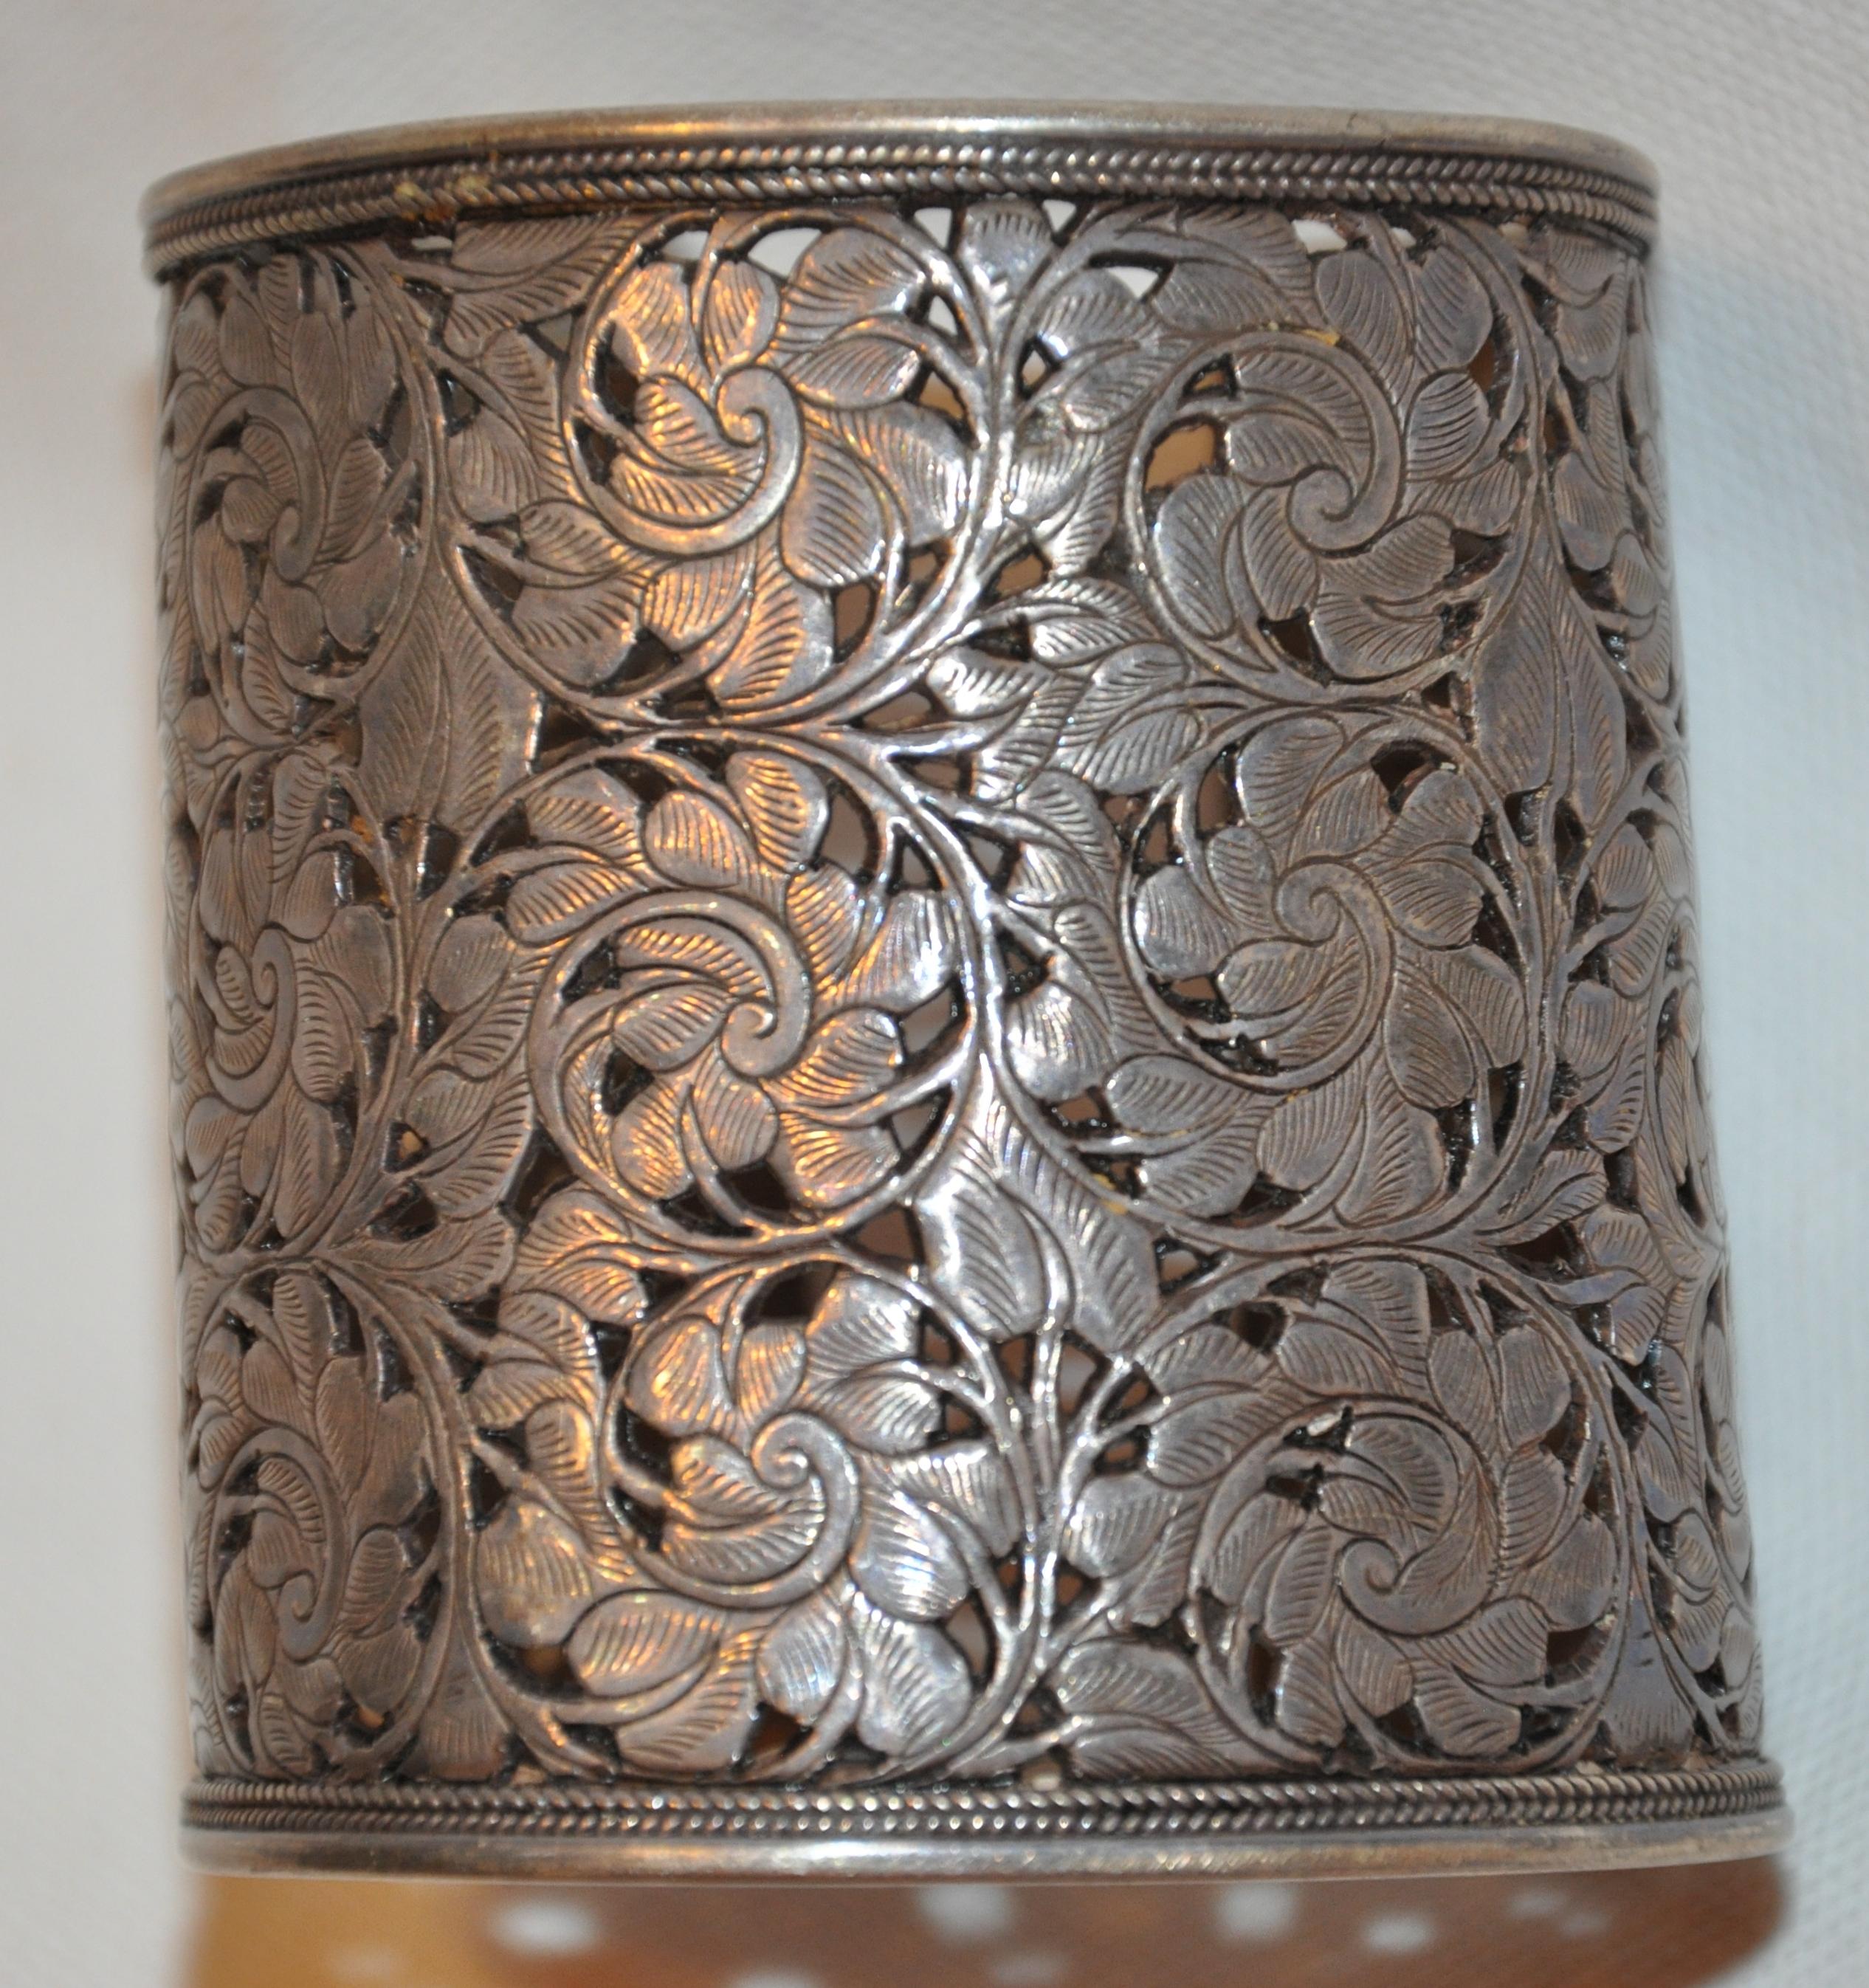        Wonderfully detailed rare thick 925 Silver cuff with multi floral throughout. Borders are accented with micro chain-link as well as micro florals along the corners. Height of this wonderful cuff measures 2 5/8 inches. The circumference